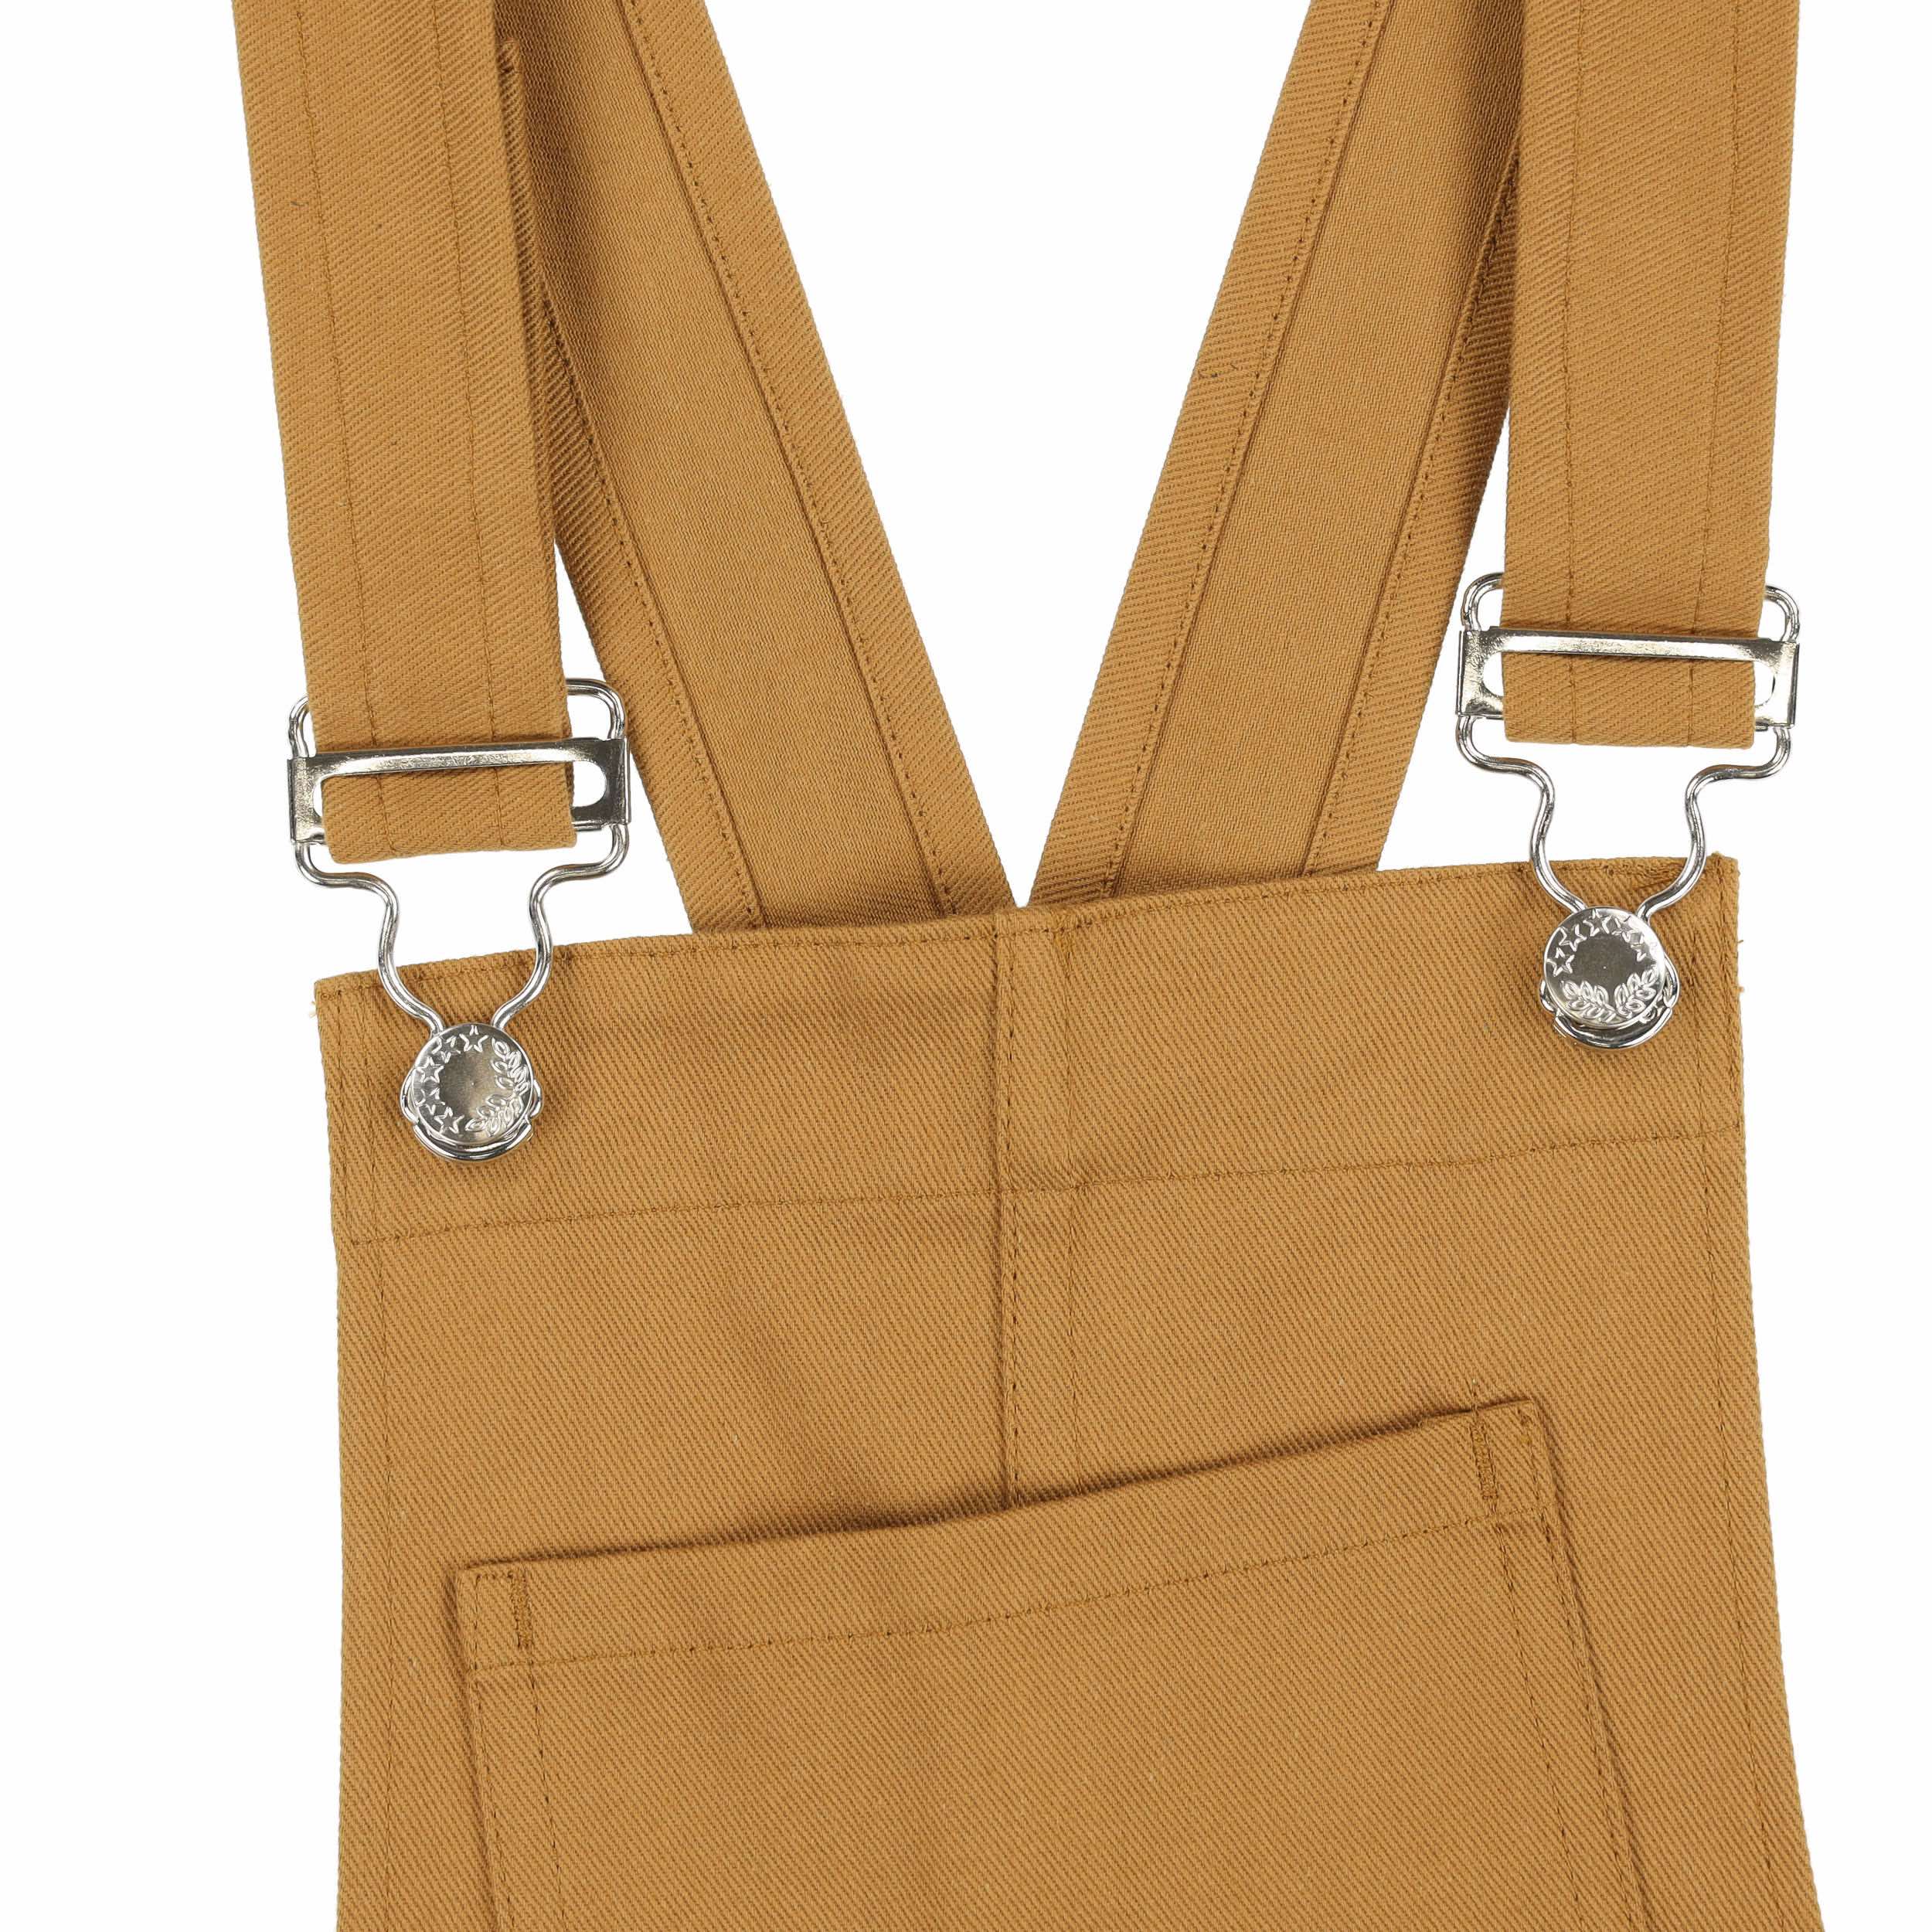 Carrier Company Men's Dungarees in Tan